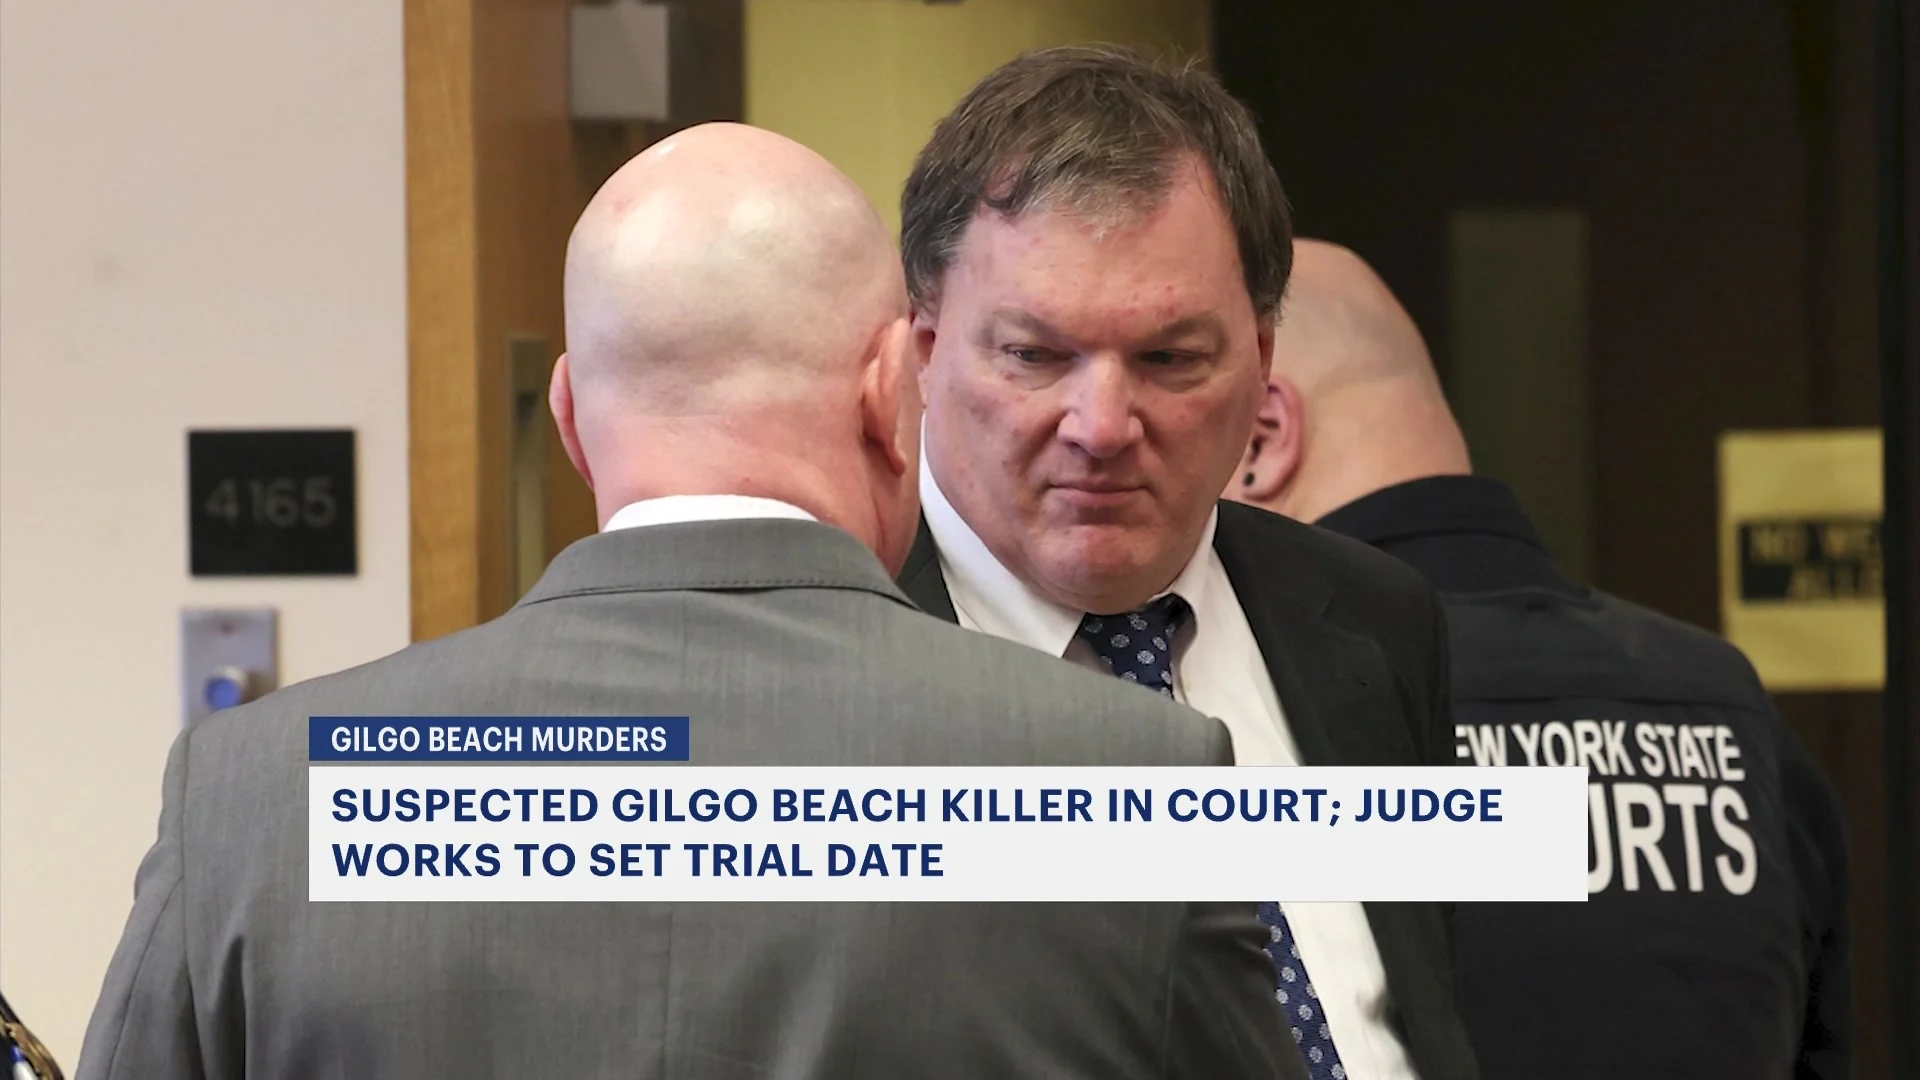 Alleged Gilgo Beach serial killer appears in court; judge works to set trial date